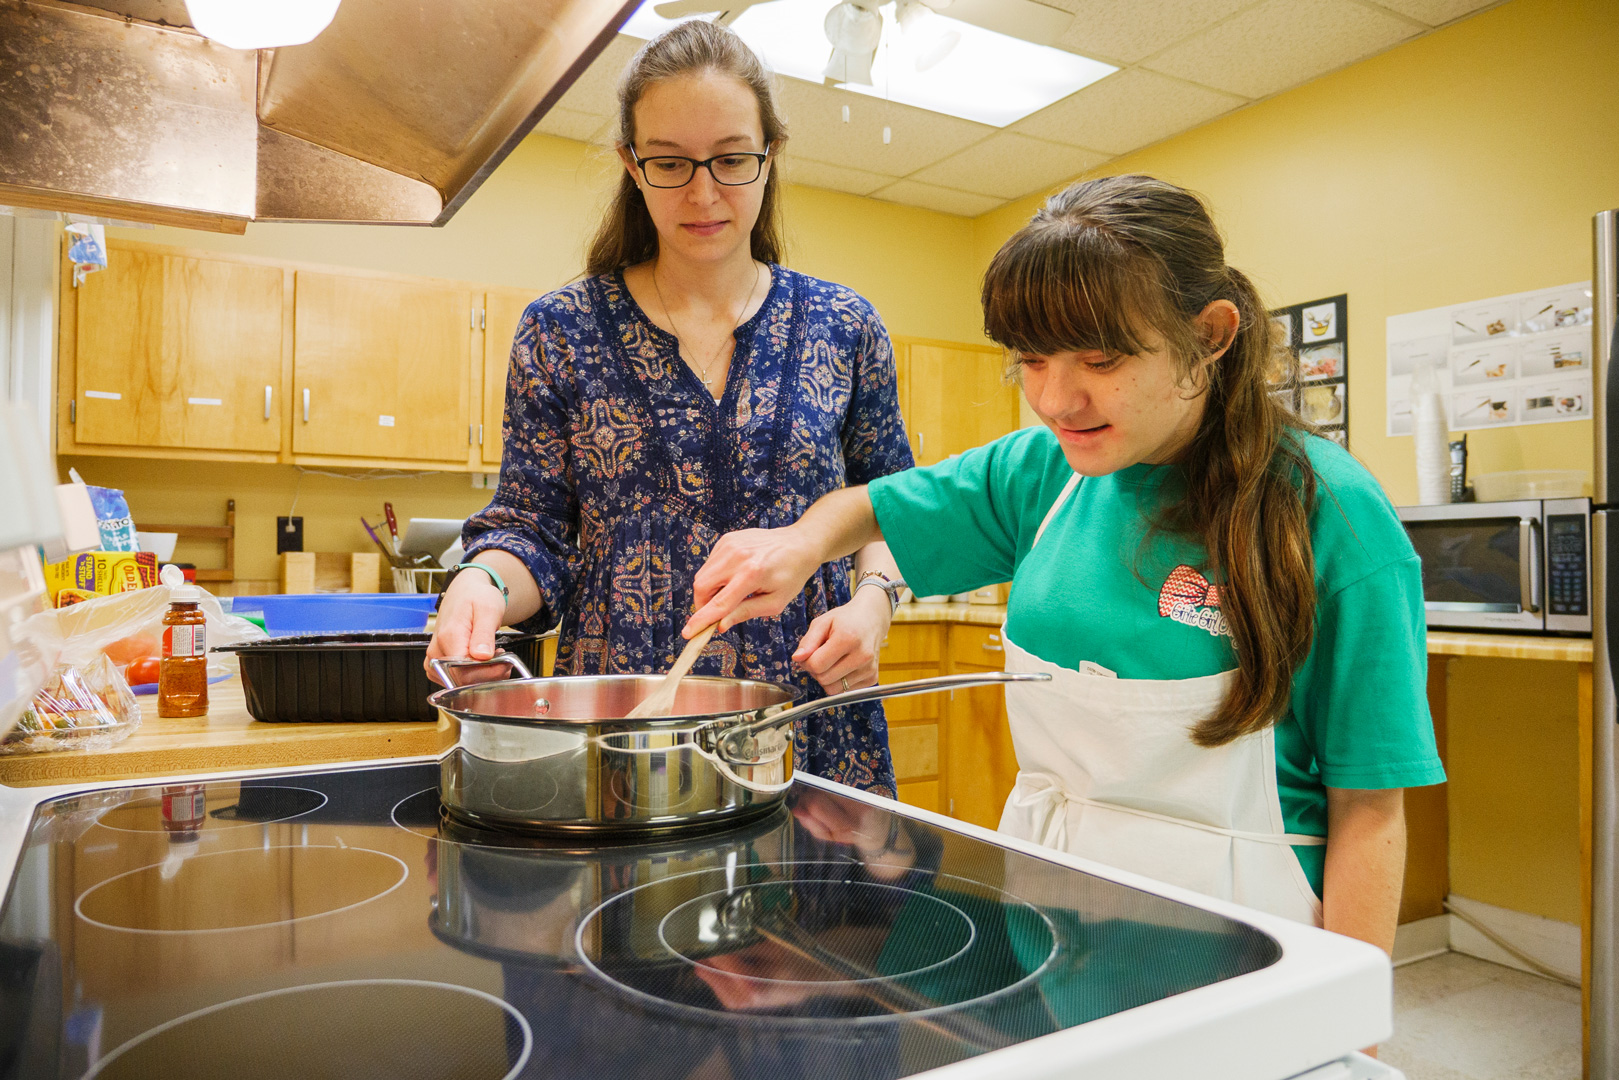 A teen learning how to use a stove for cooking with a parent.